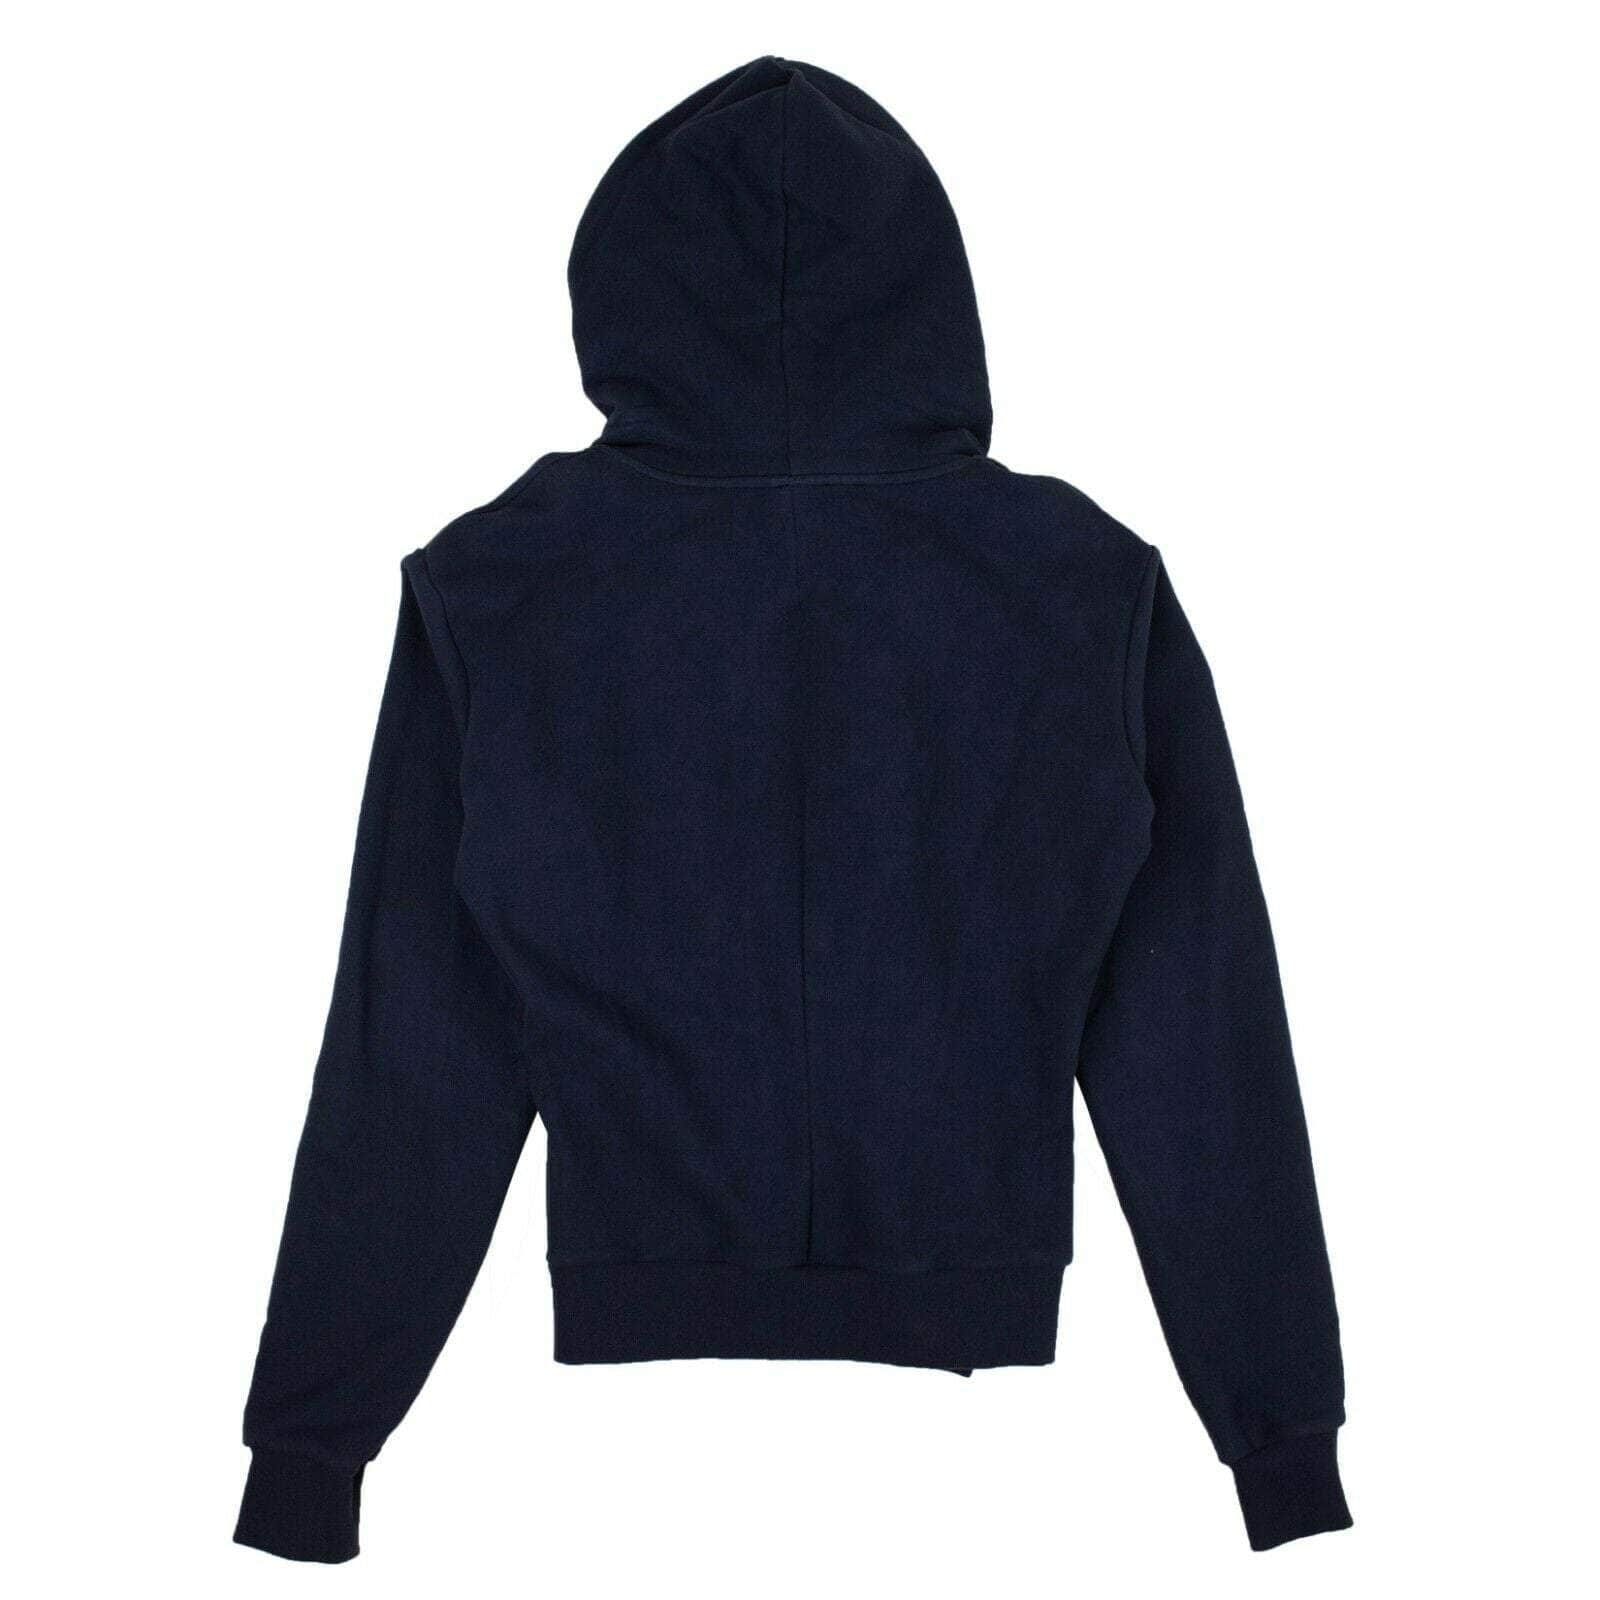 UNRAVEL PROJECT channelenable-all, couponcollection, gender-mens, main-clothing, size-s, under-250, unravel-project S / 82NGG-UN-1103/S Navy Blue Ruffle Zip Up Hooded Sweatshirt 82NGG-UN-1103/S 82NGG-UN-1103/S